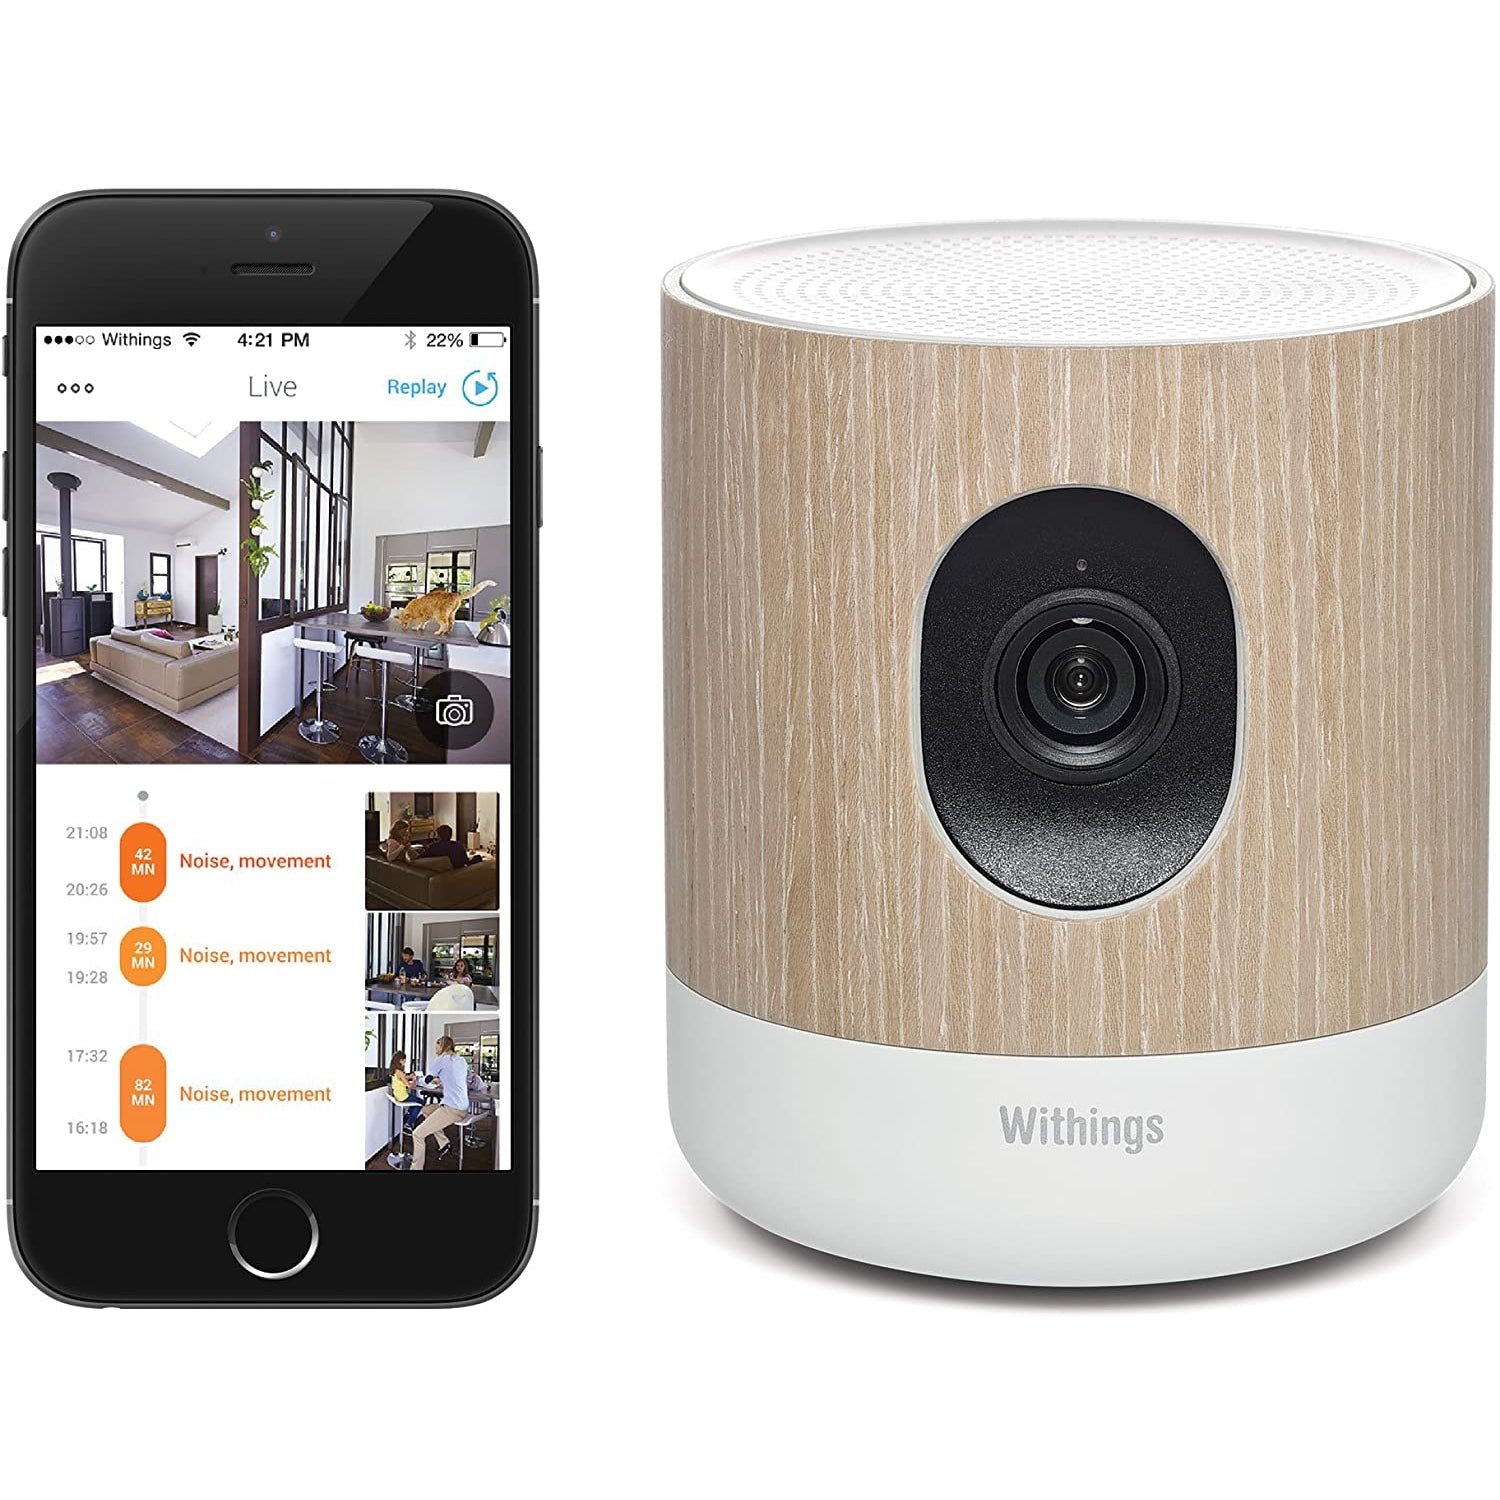 Withings WBP02 Wireless Home Security Camera - White/Brown